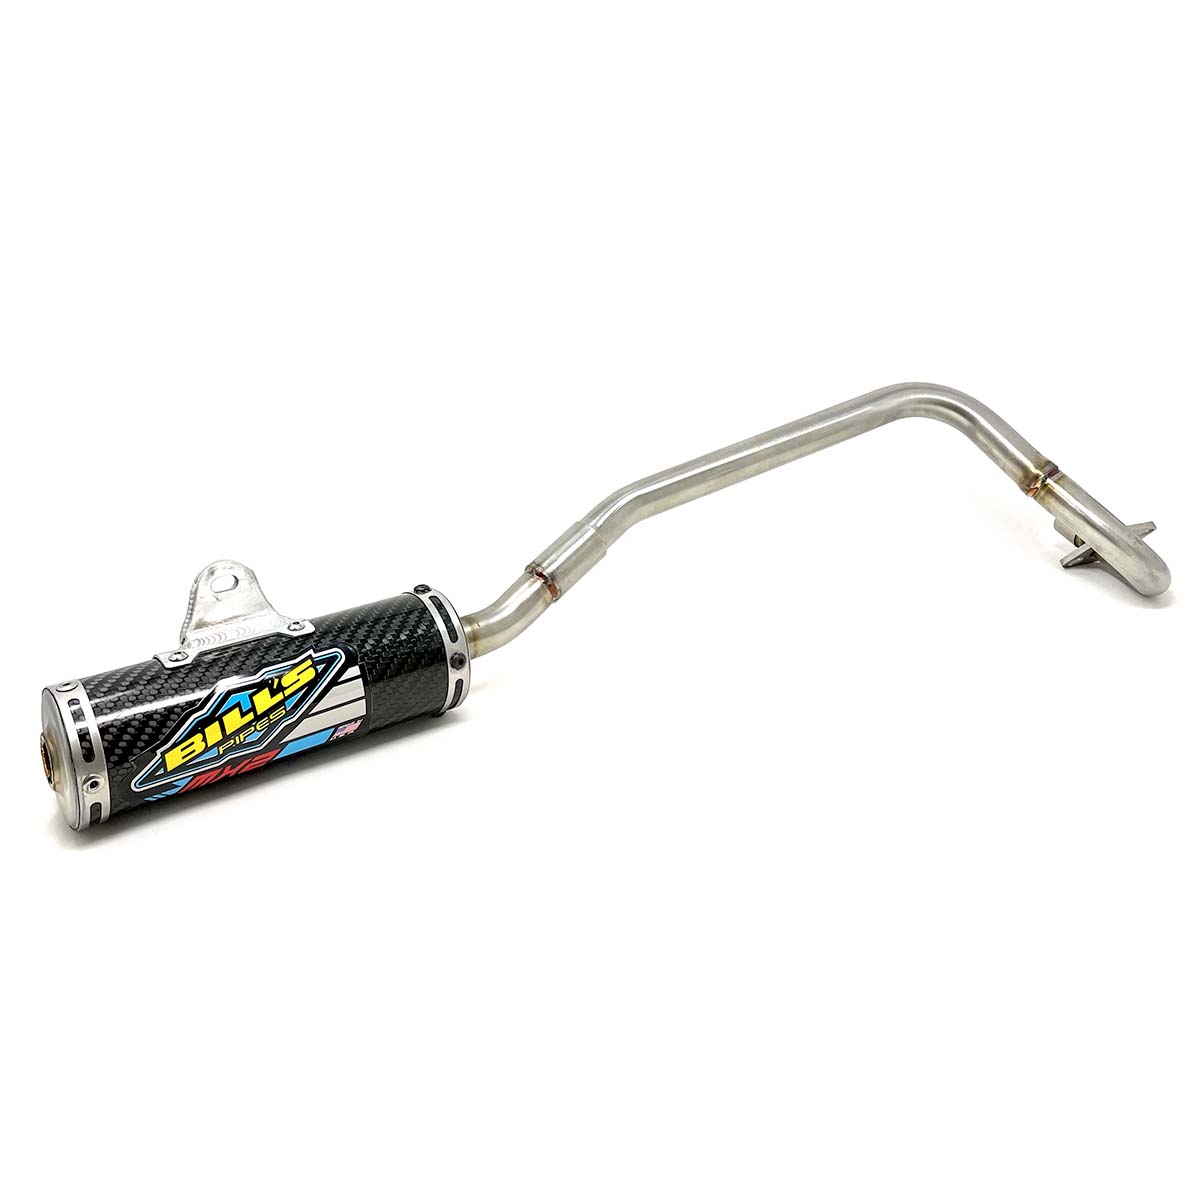 Bill's Pipes RE 13 Exhaust - ATC70